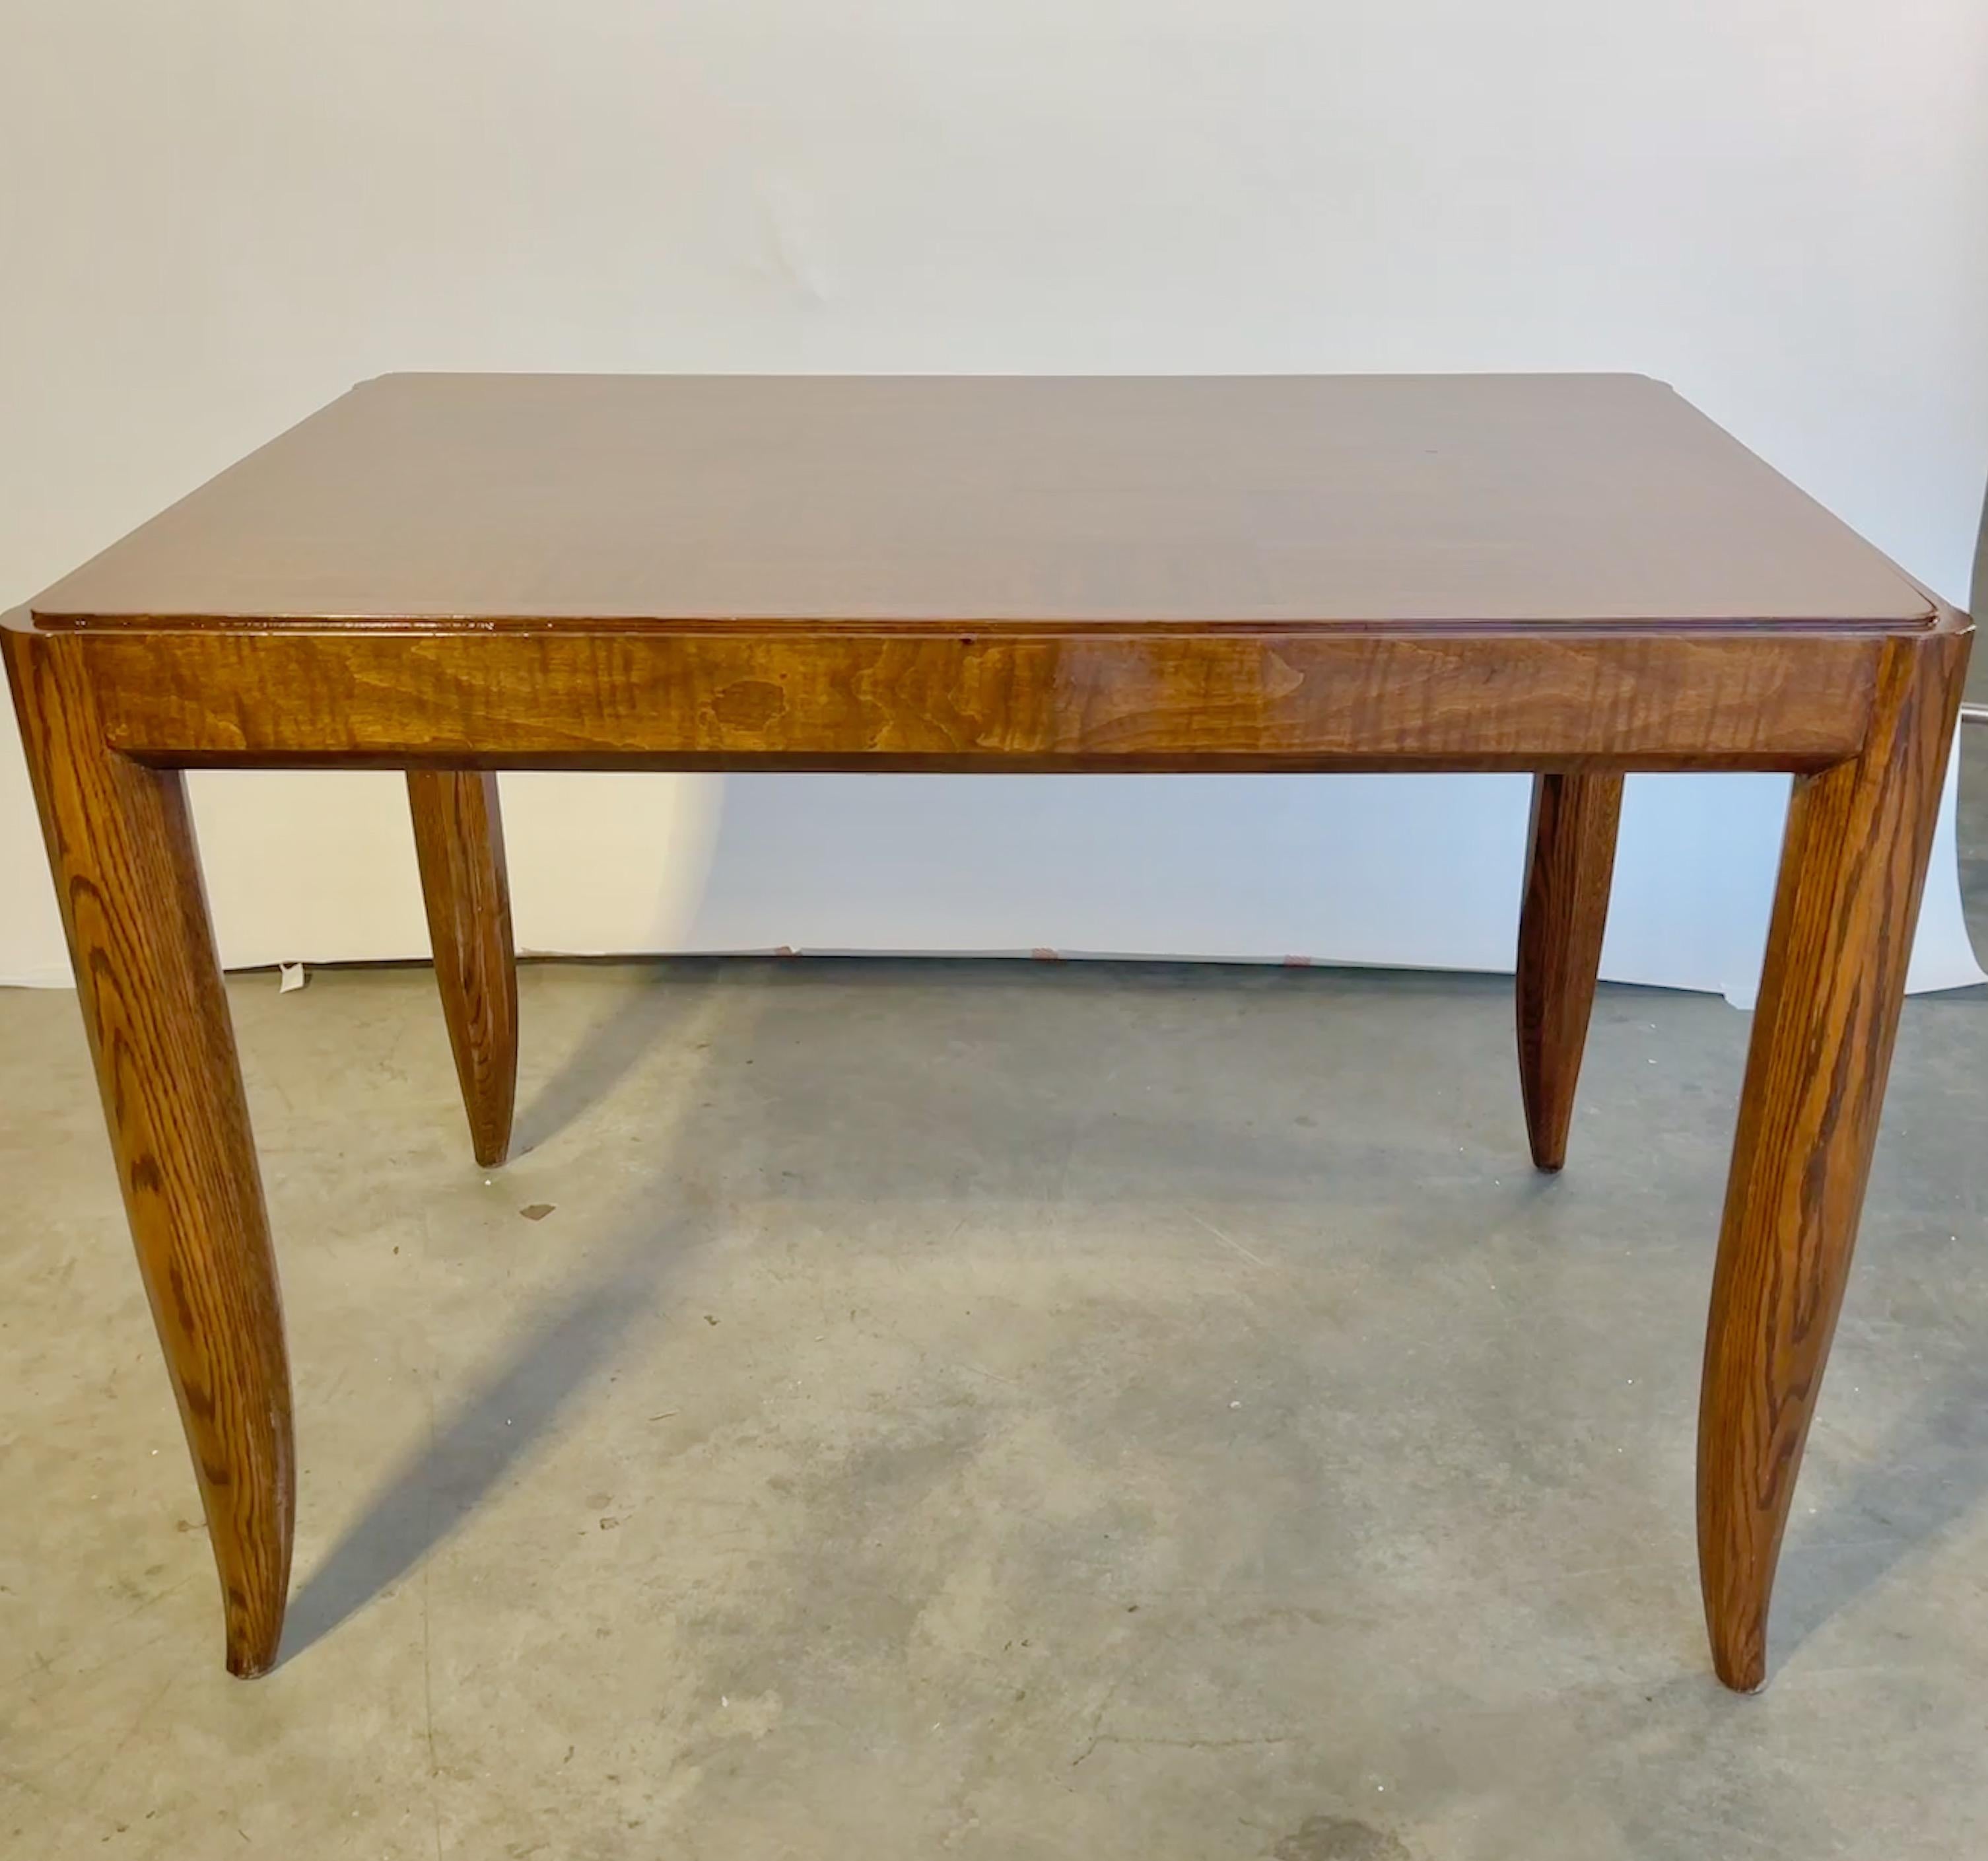 French Art Deco writing table or desk with two side drawers, maple parquet top, rounded (subtly octagonal) oak legs with elegant feet, in clear gloss finish. In the style of Andre Domin & Marcel Genevriere for Maison Dominique.
It also bears a